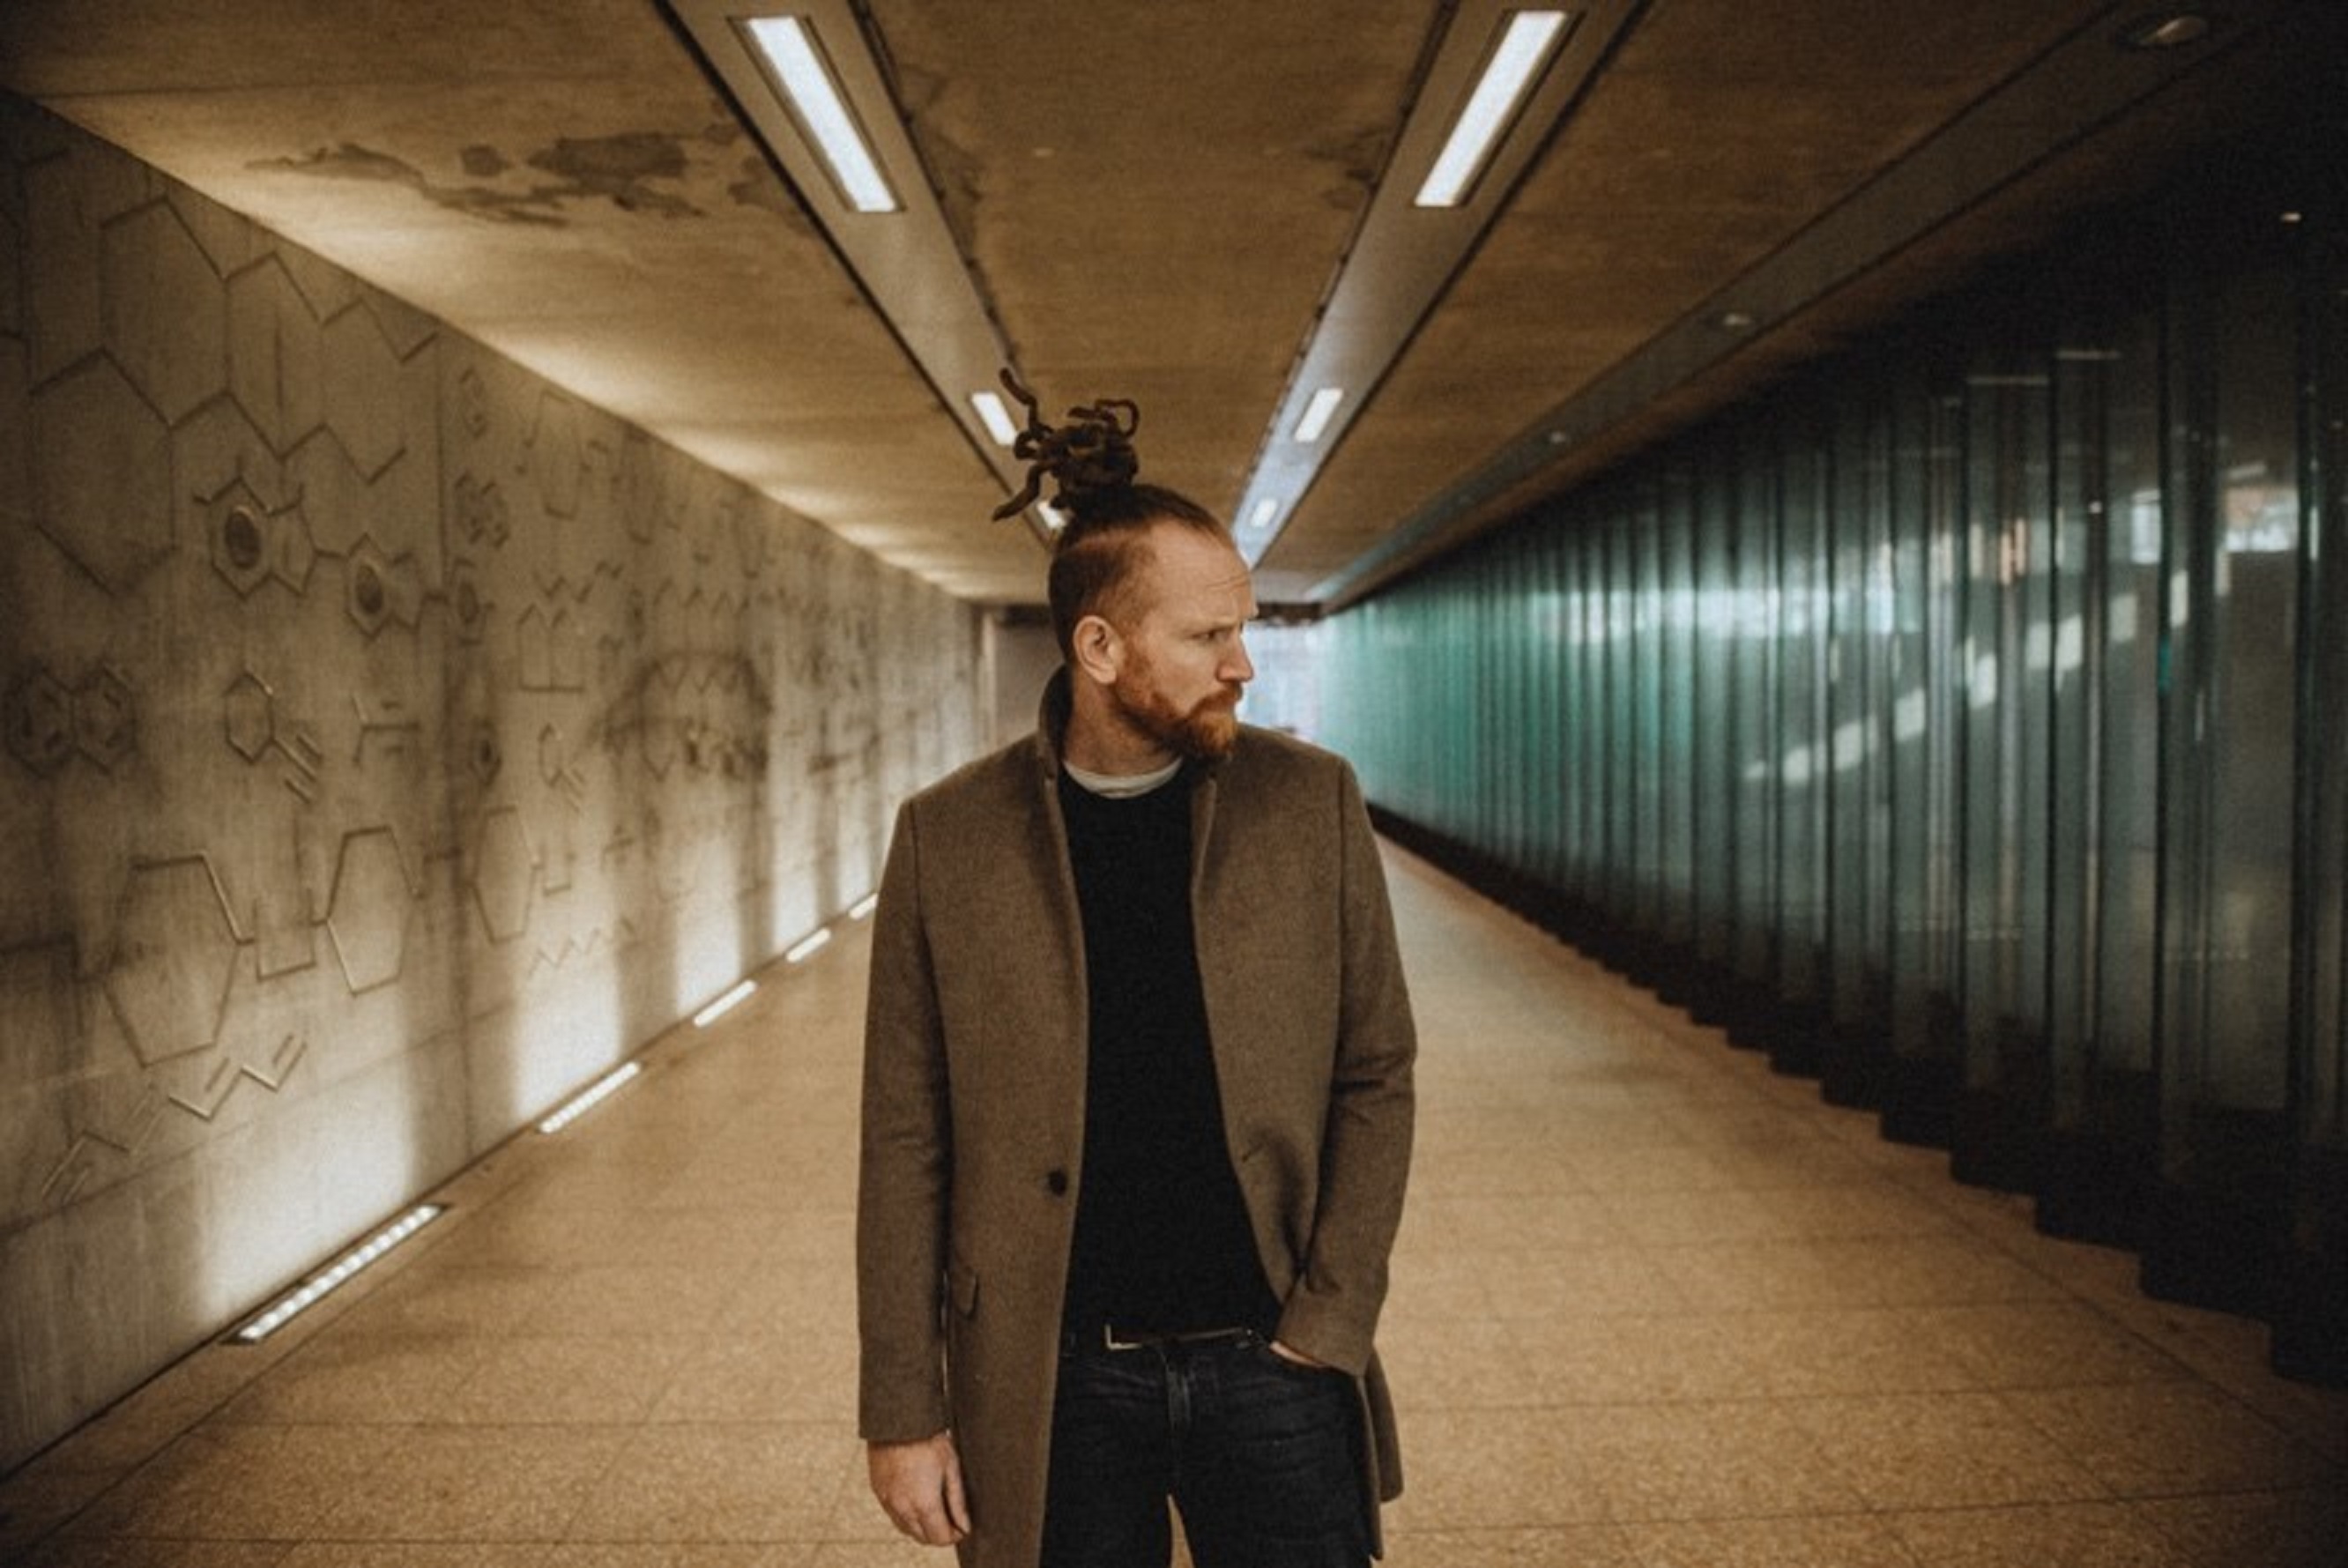 NEWTON FAULKNER RELEASES “LEAVE ME LONELY” TODAY